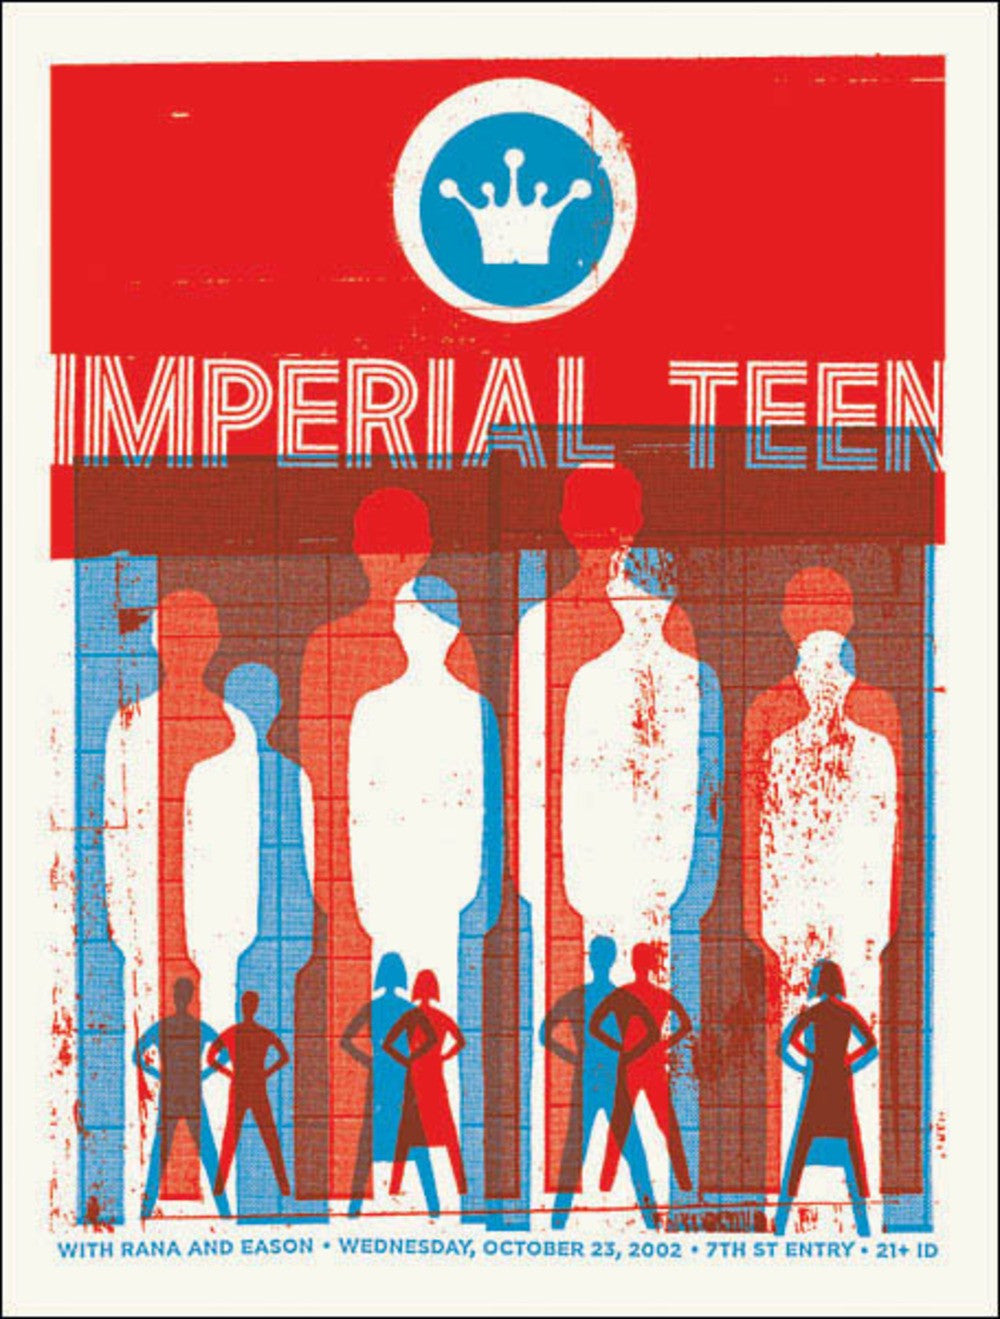 Aesthetic Apparatus - 2002 - Imperial Teen Concert Poster